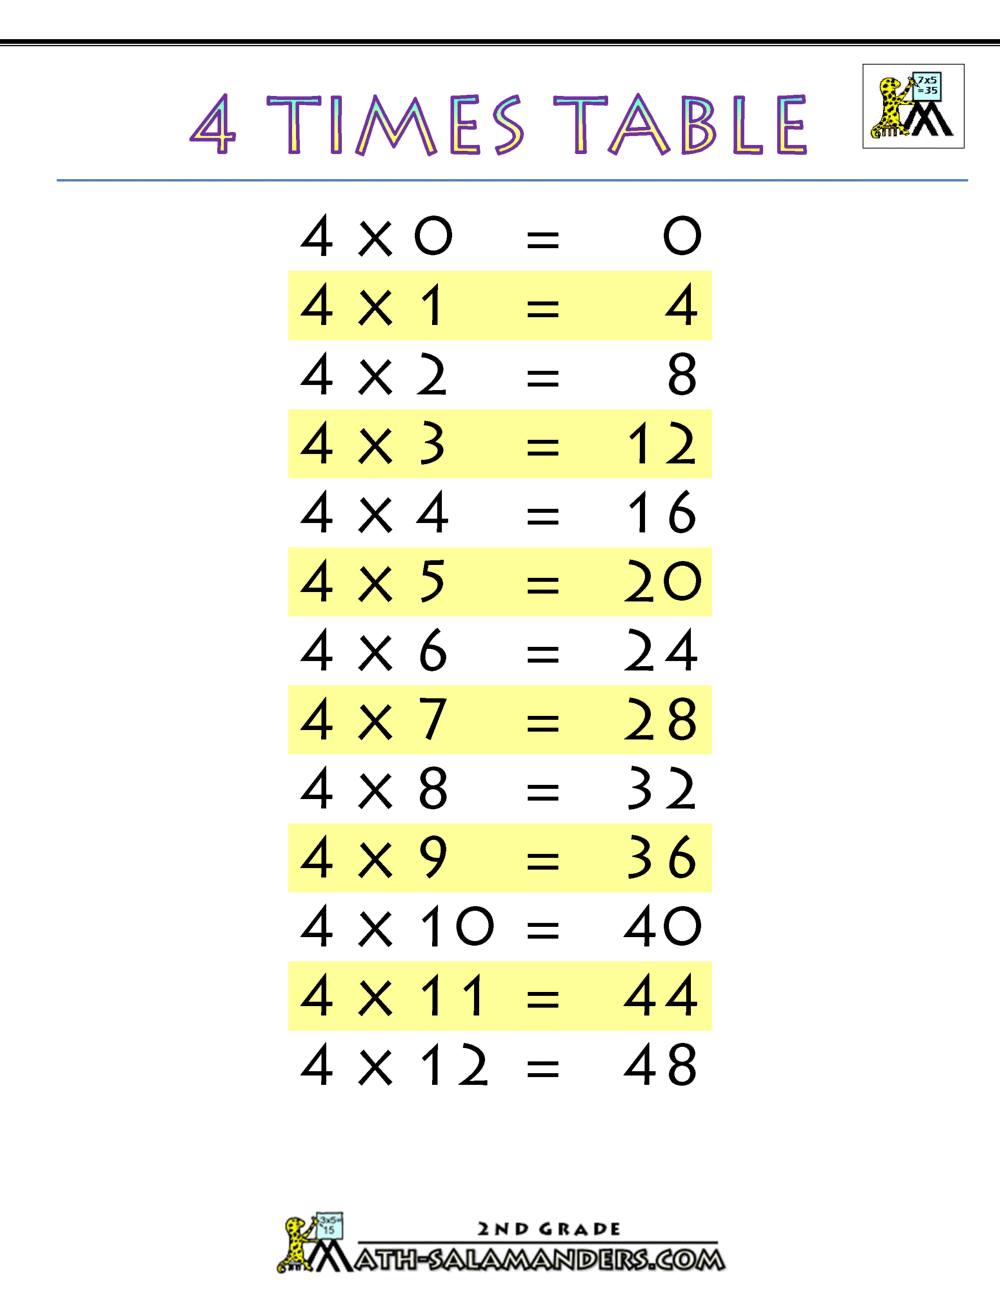 8 times table chart